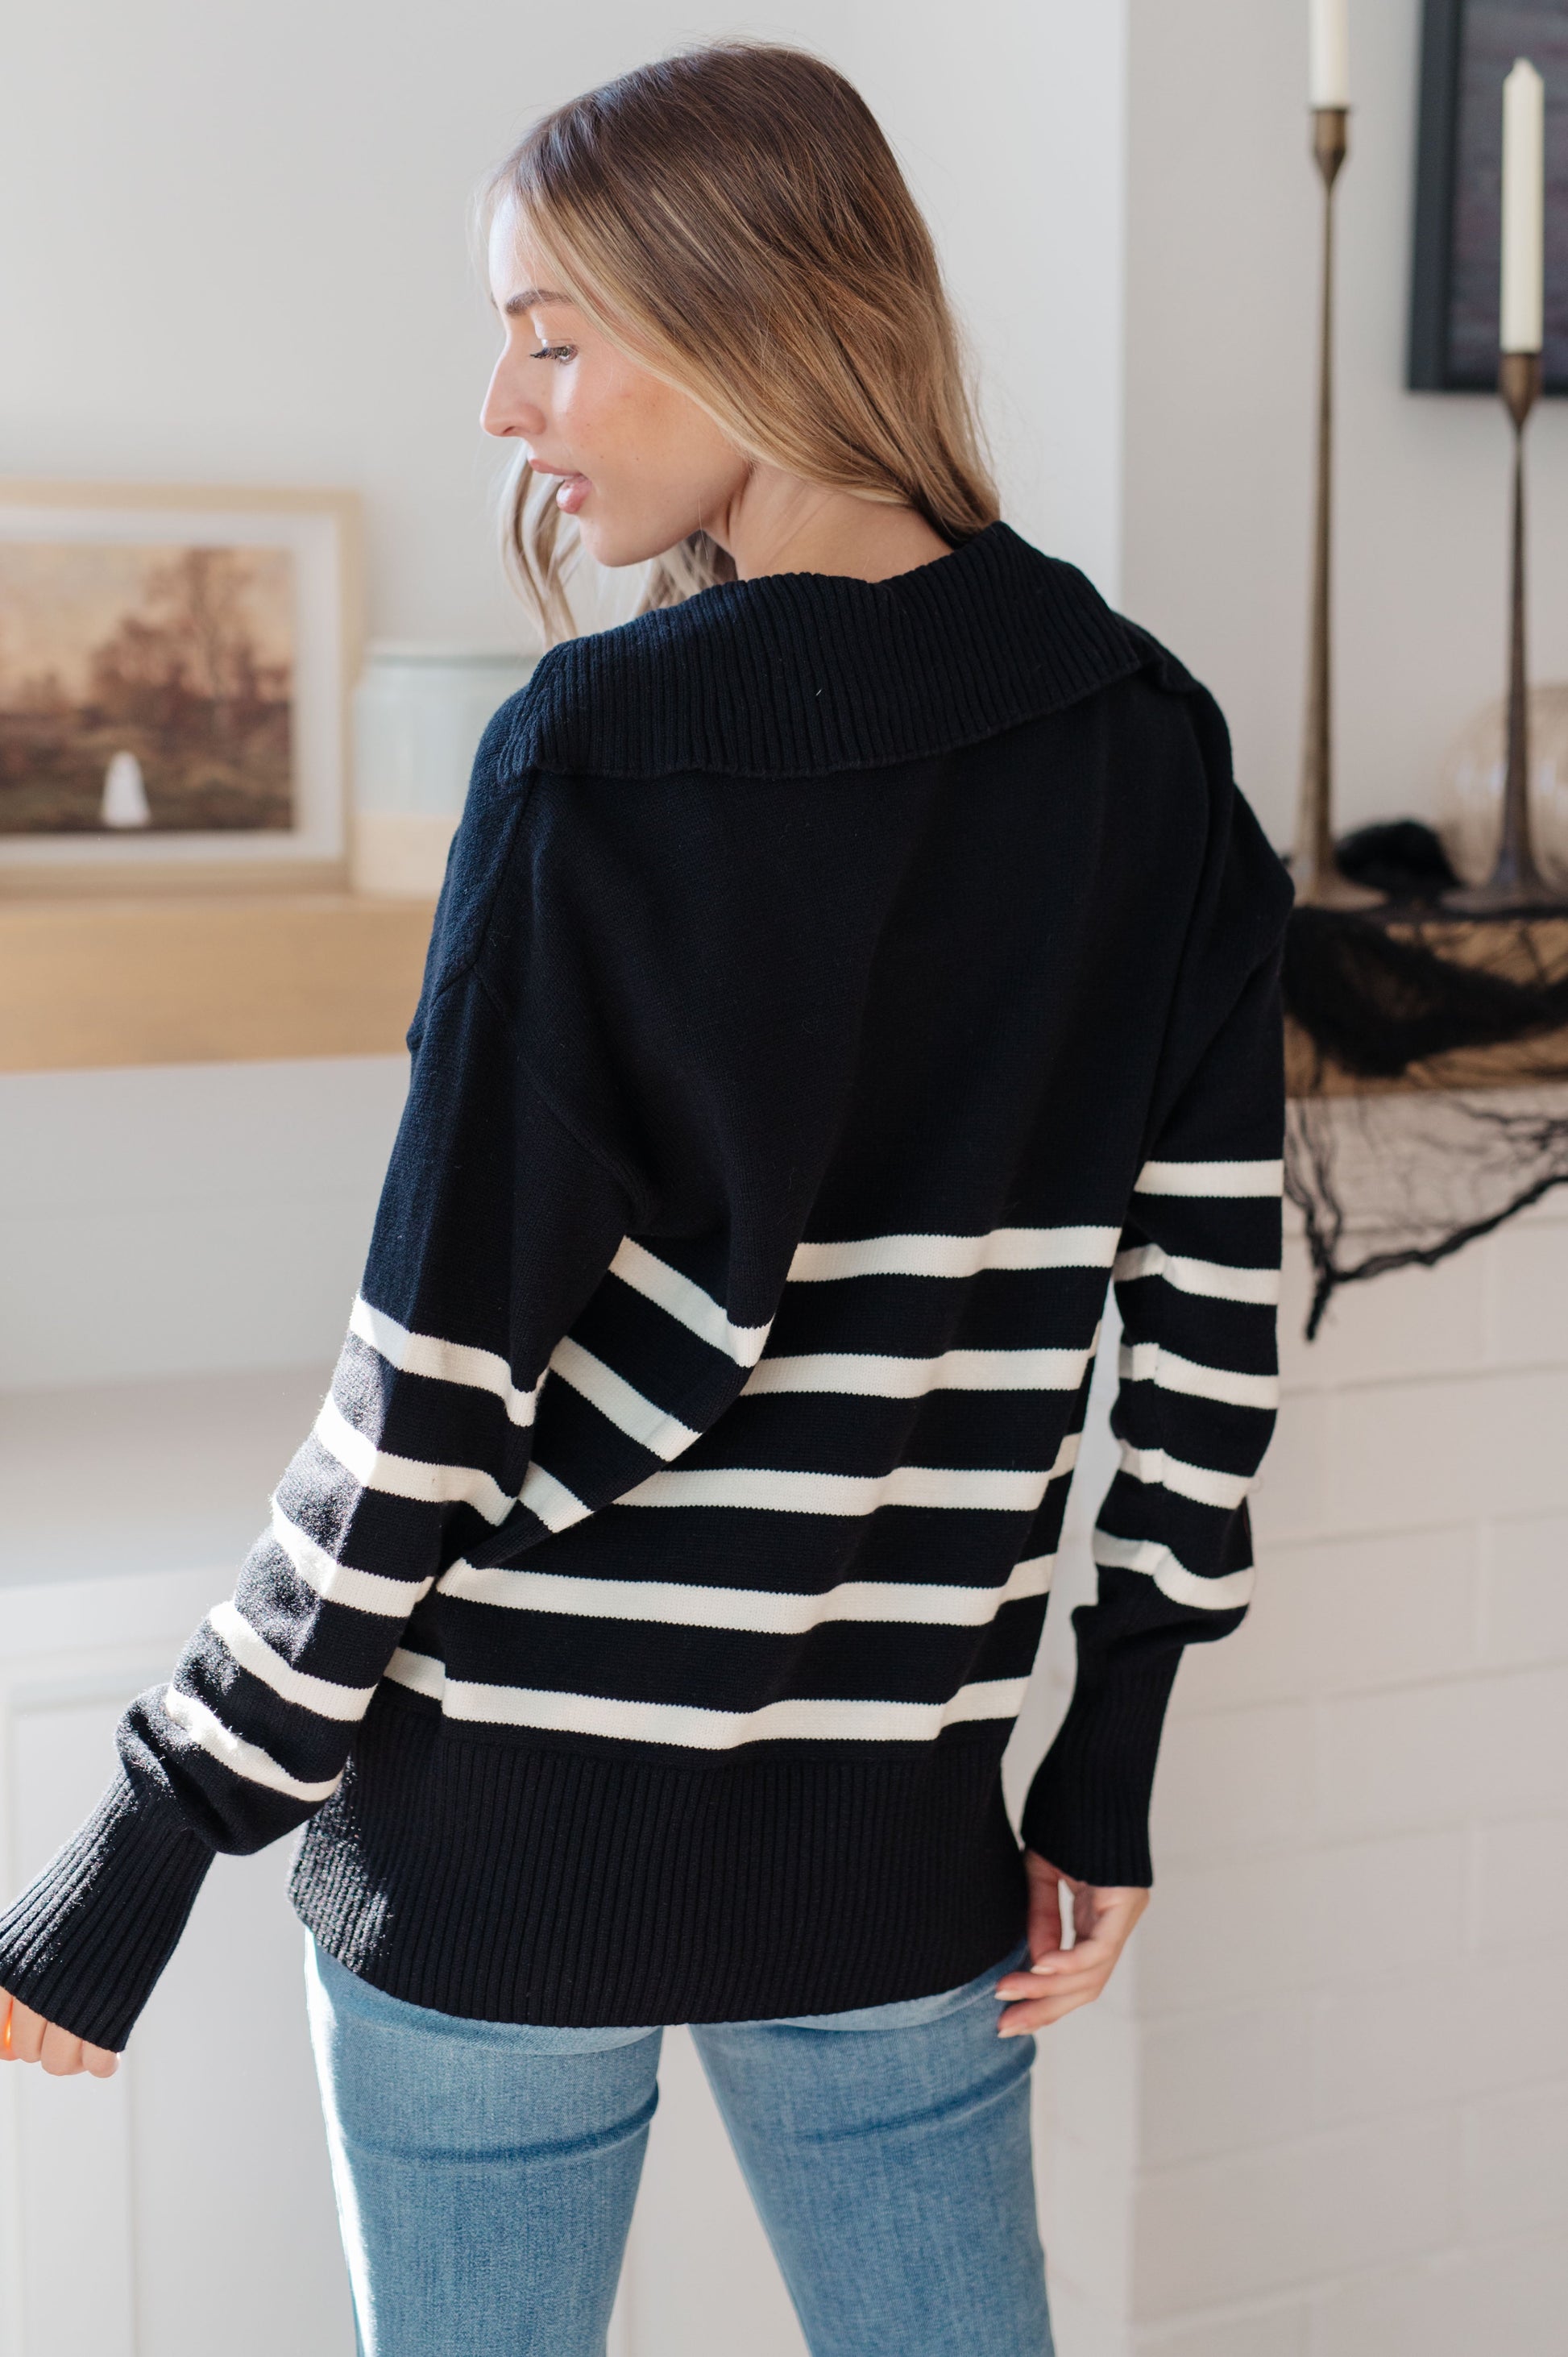 From Here On Out Striped Sweater - Southern Divas Boutique